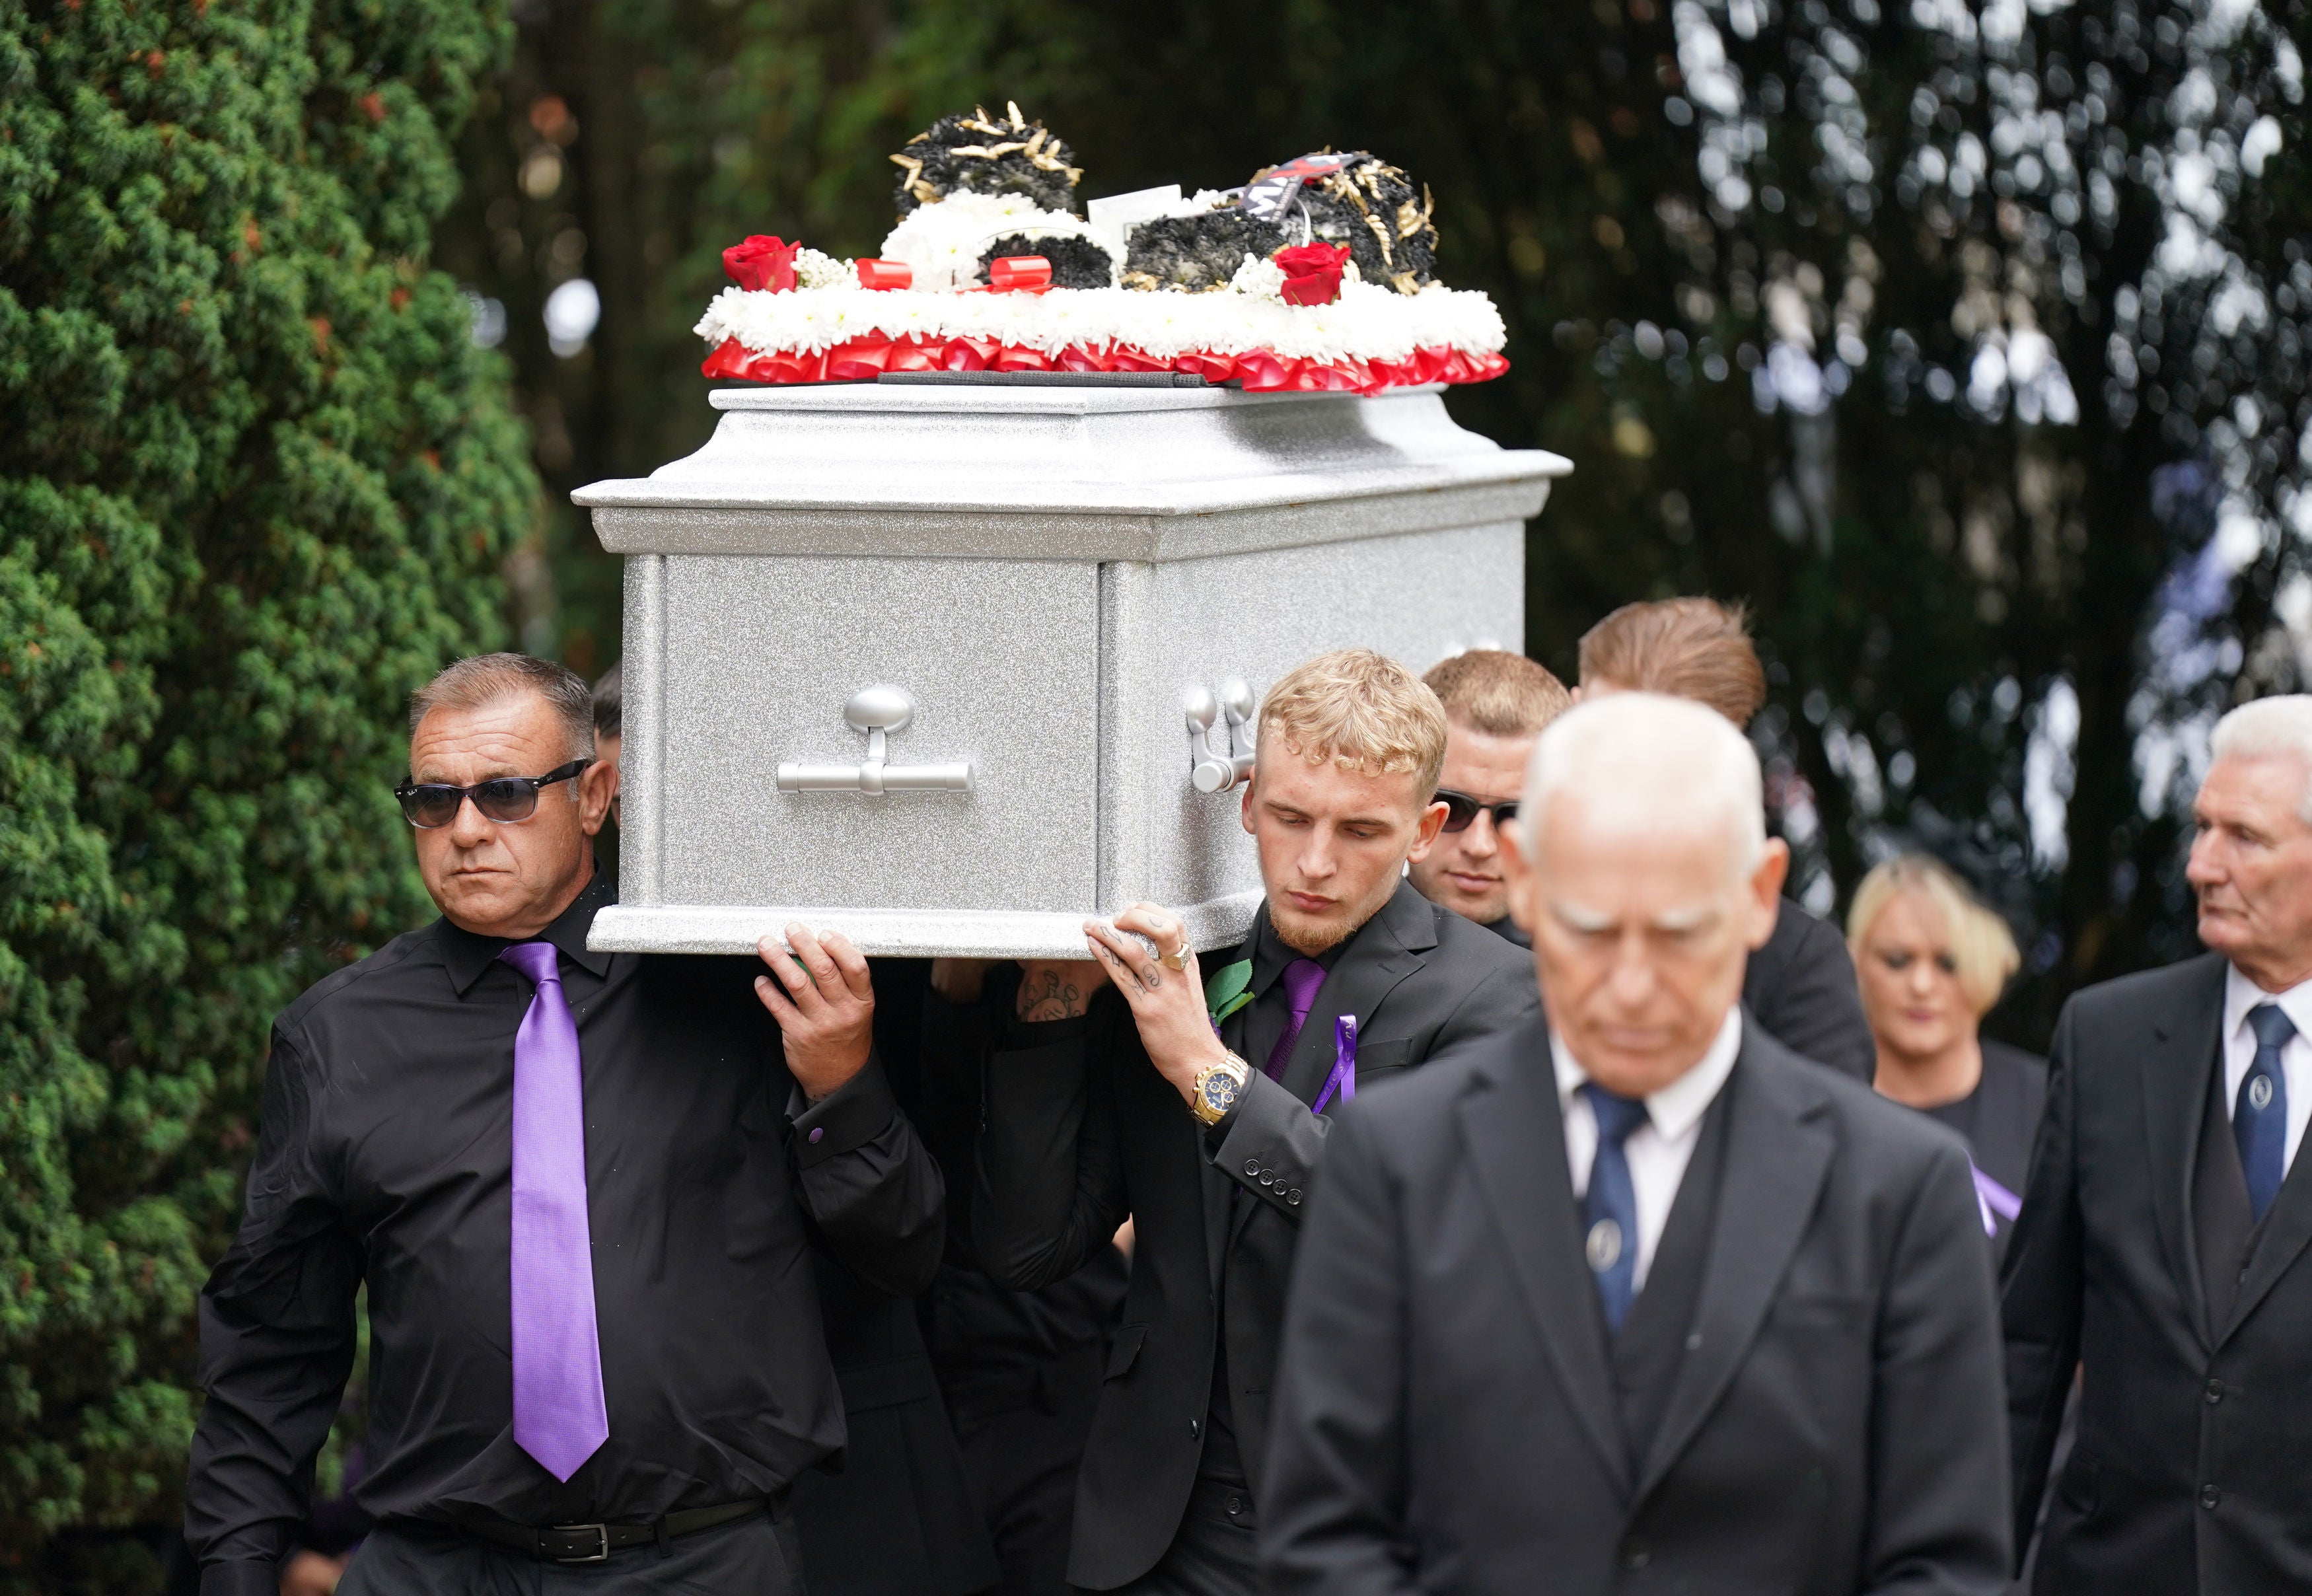 Archie’s coffin is brought into St Mary's Church, Prittlewell, Southend-on-Sea, Essex, ahead of his funeral